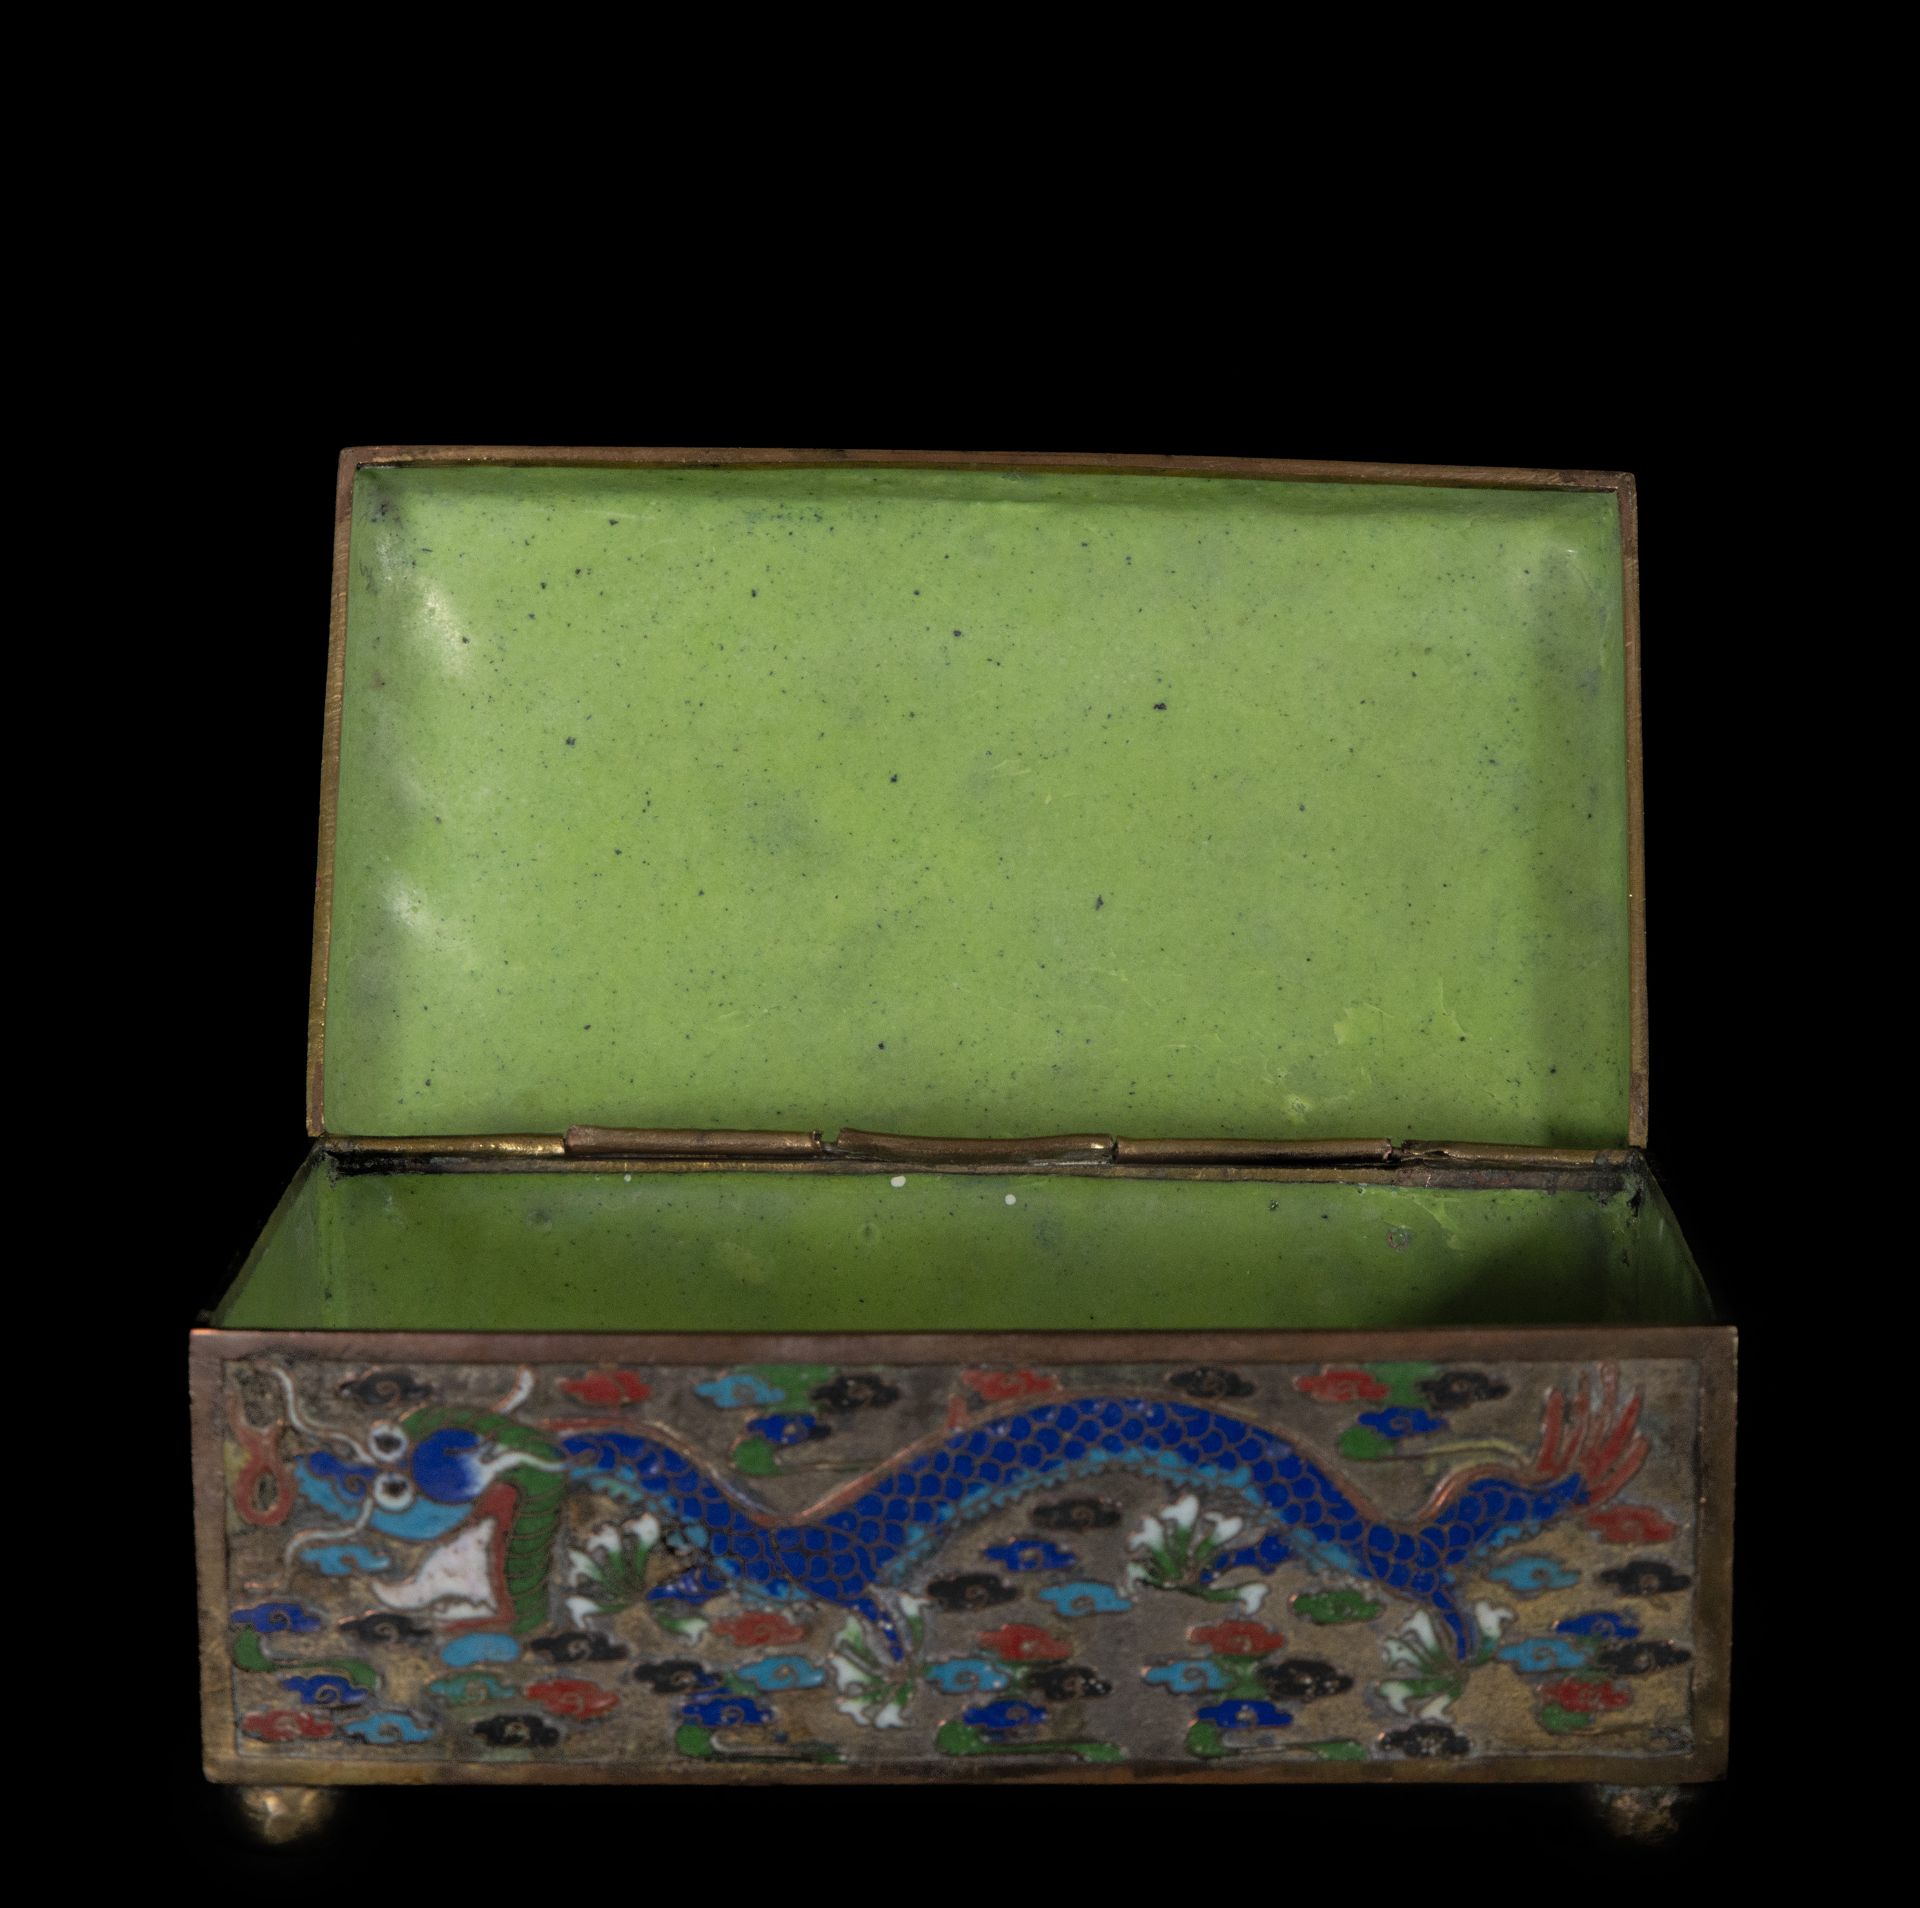 Chinese Cloisonne box from the 19th century - Image 2 of 5